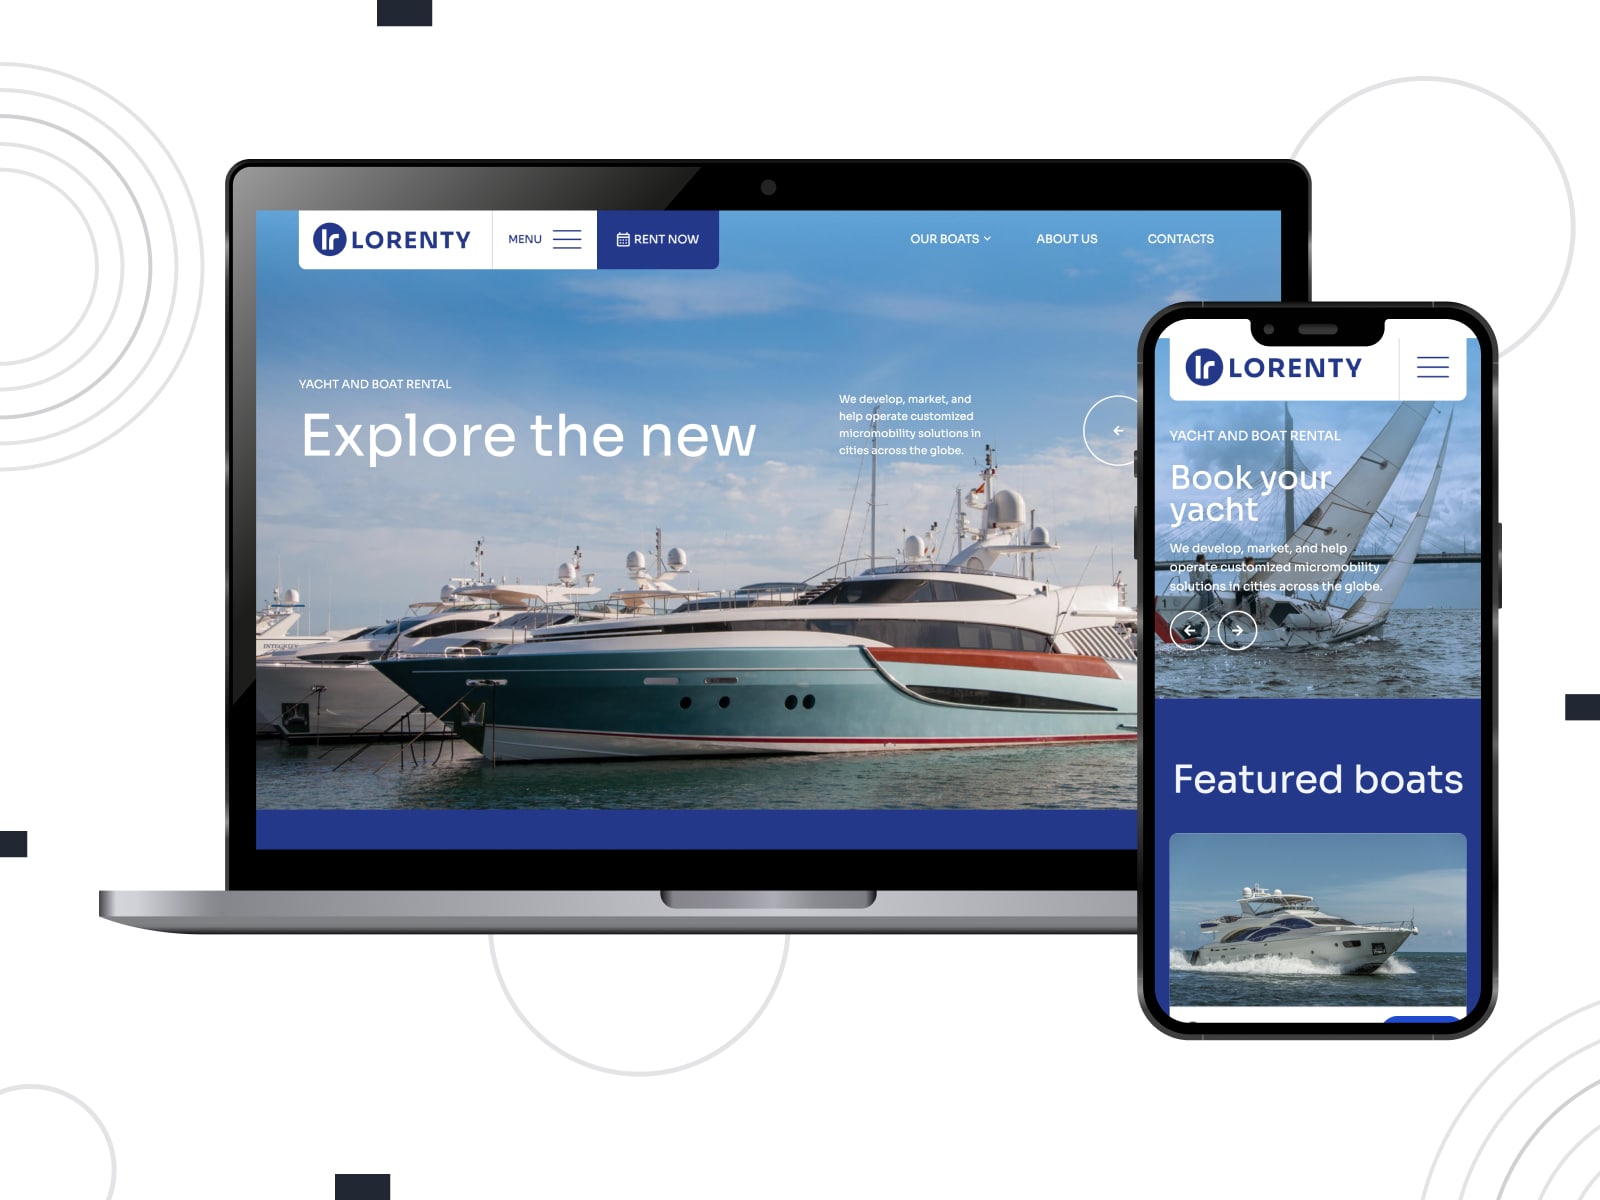 Collage of the Lorenty boat rental demo page on mobile and desktop screens.